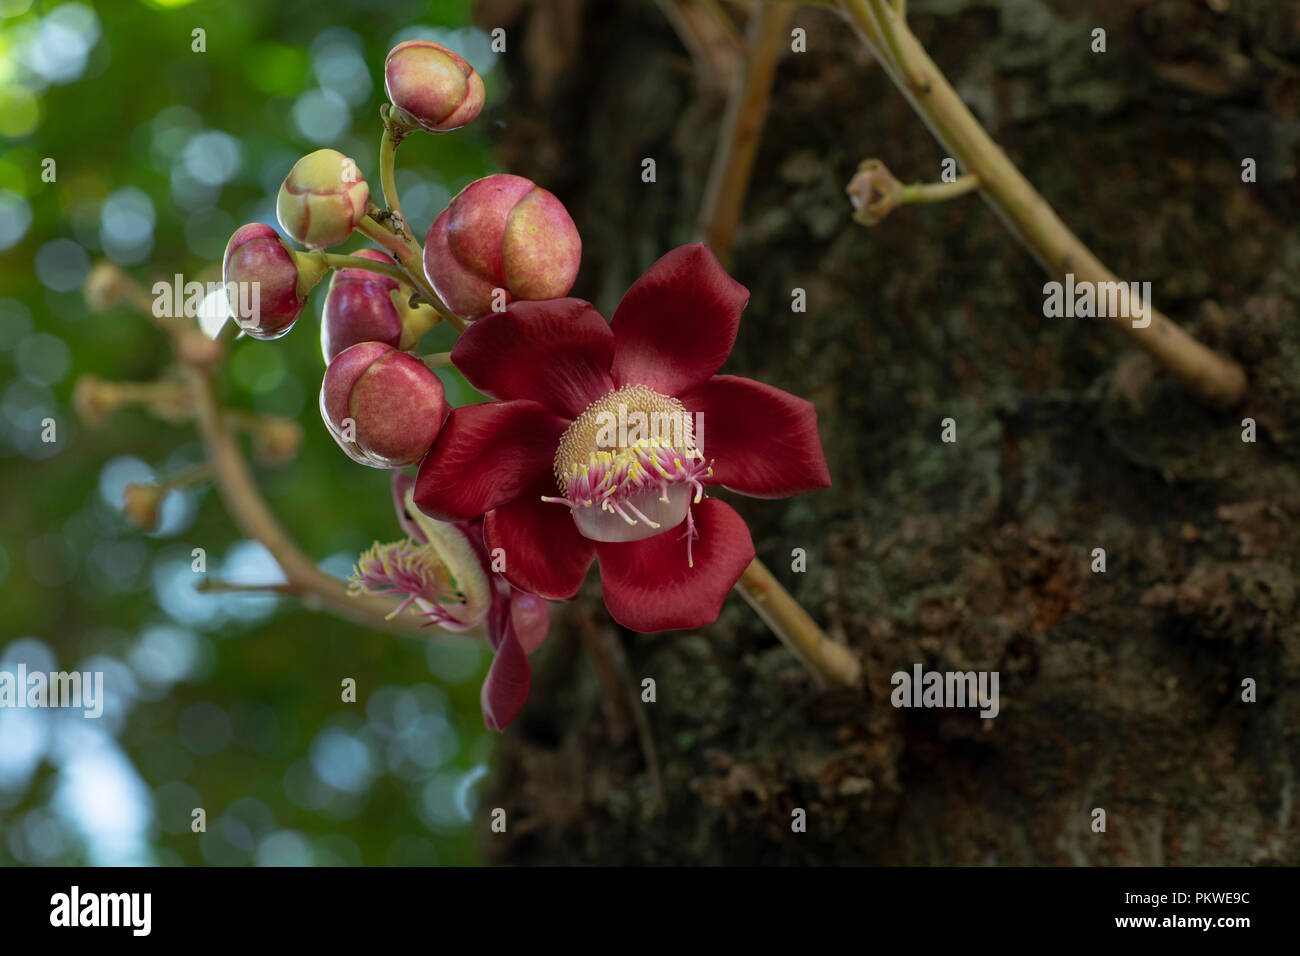 Couroupita guianensis. Flowers and exotic fruits. Common in landscaping of Rio de Janeiro, Brazil. Stock Photo